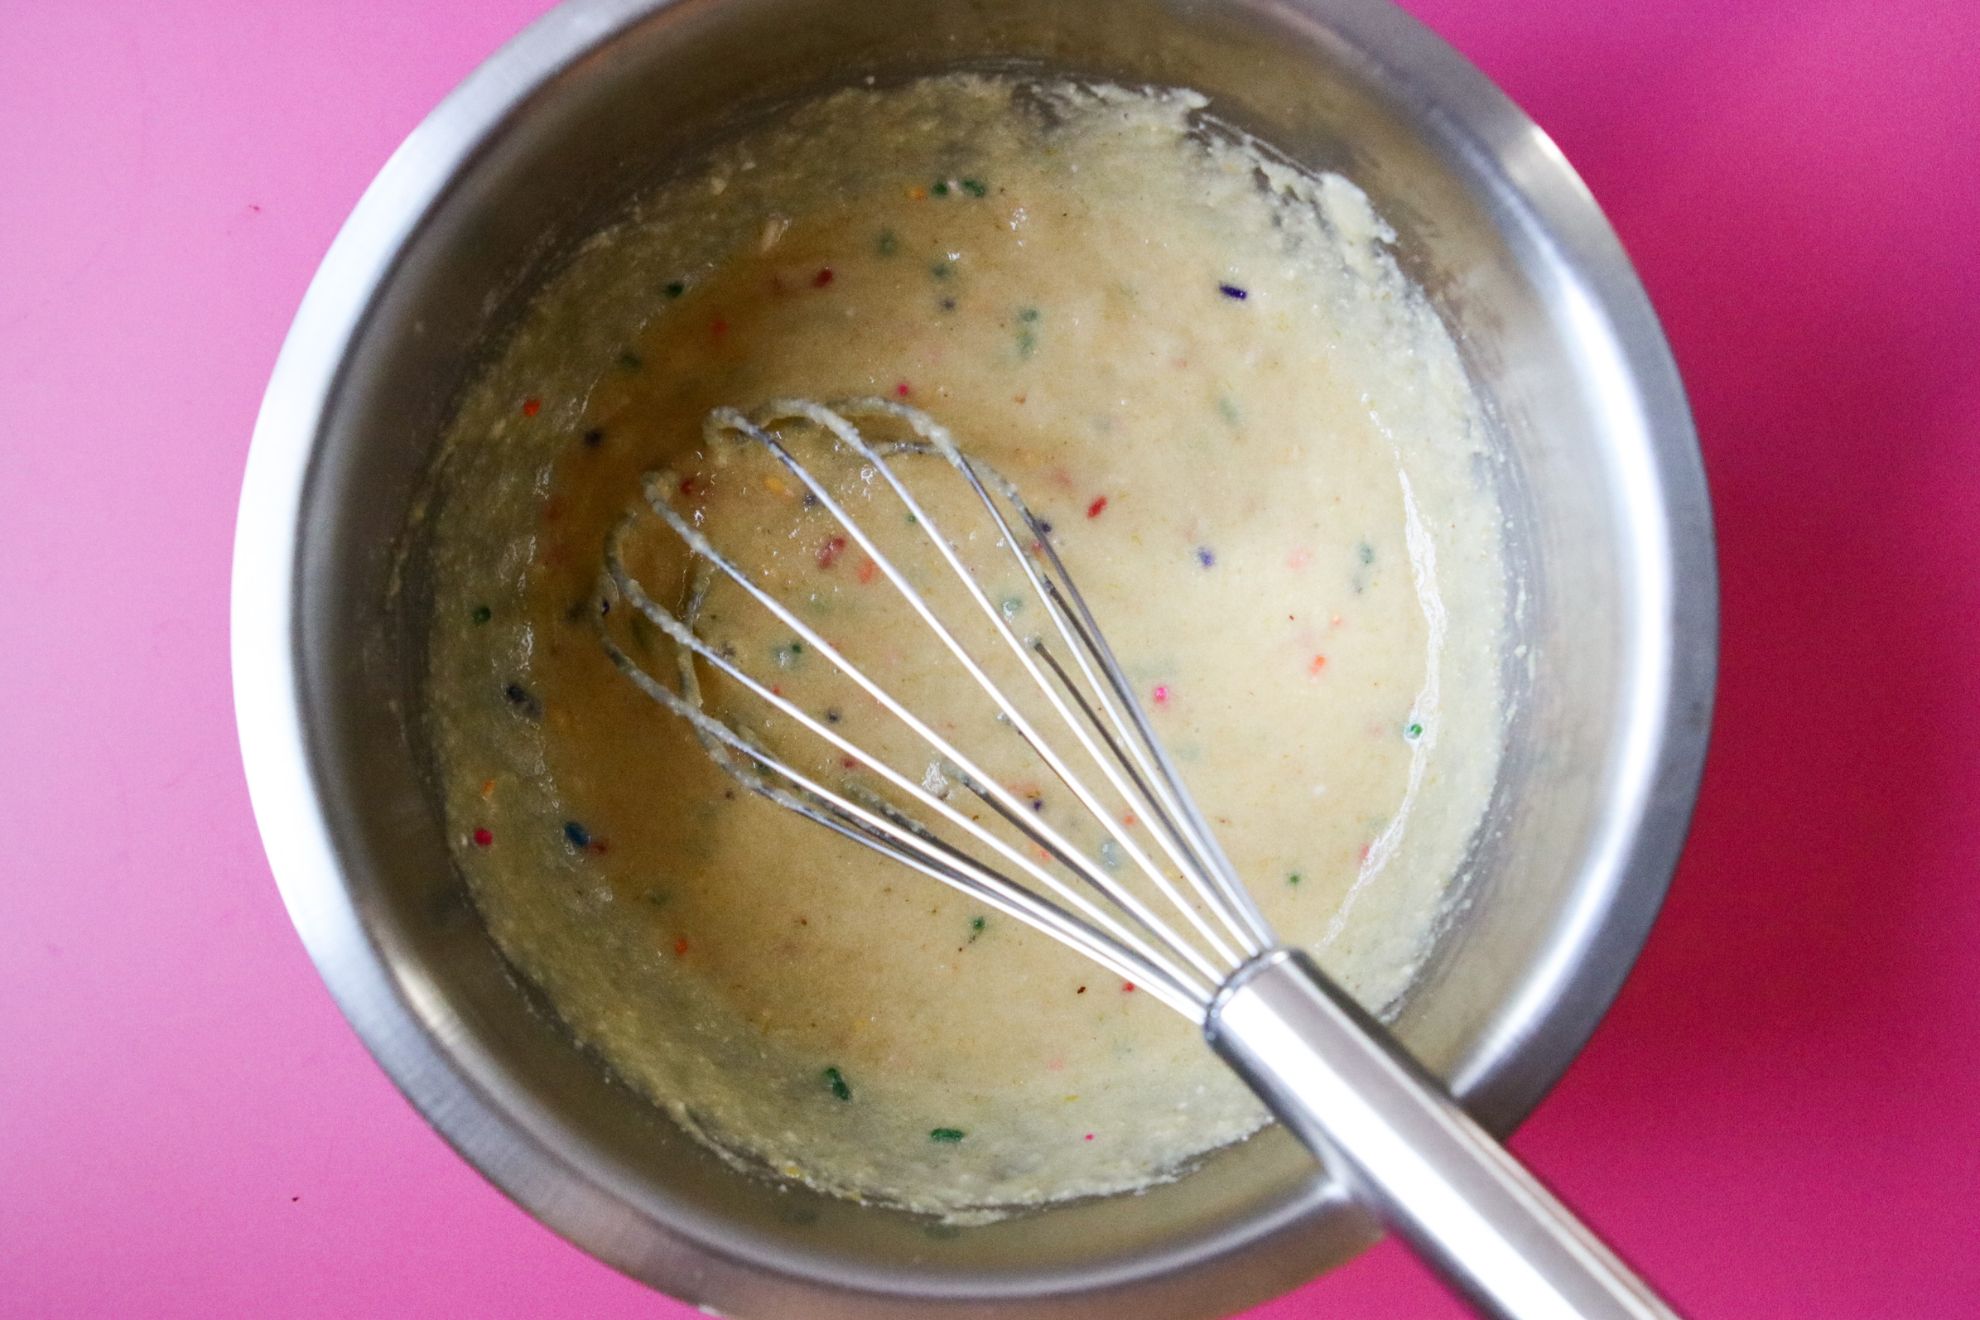 This is an overhead horizontal image of a stainless steel bowl with a vanilla batter with rainbow sprinkles mixed in. A whisk is in the batter with the handle of the whisk leaning against the side of the bowl and angled to the bottom right corner of the image. The bowl sits on a dark pink surface.